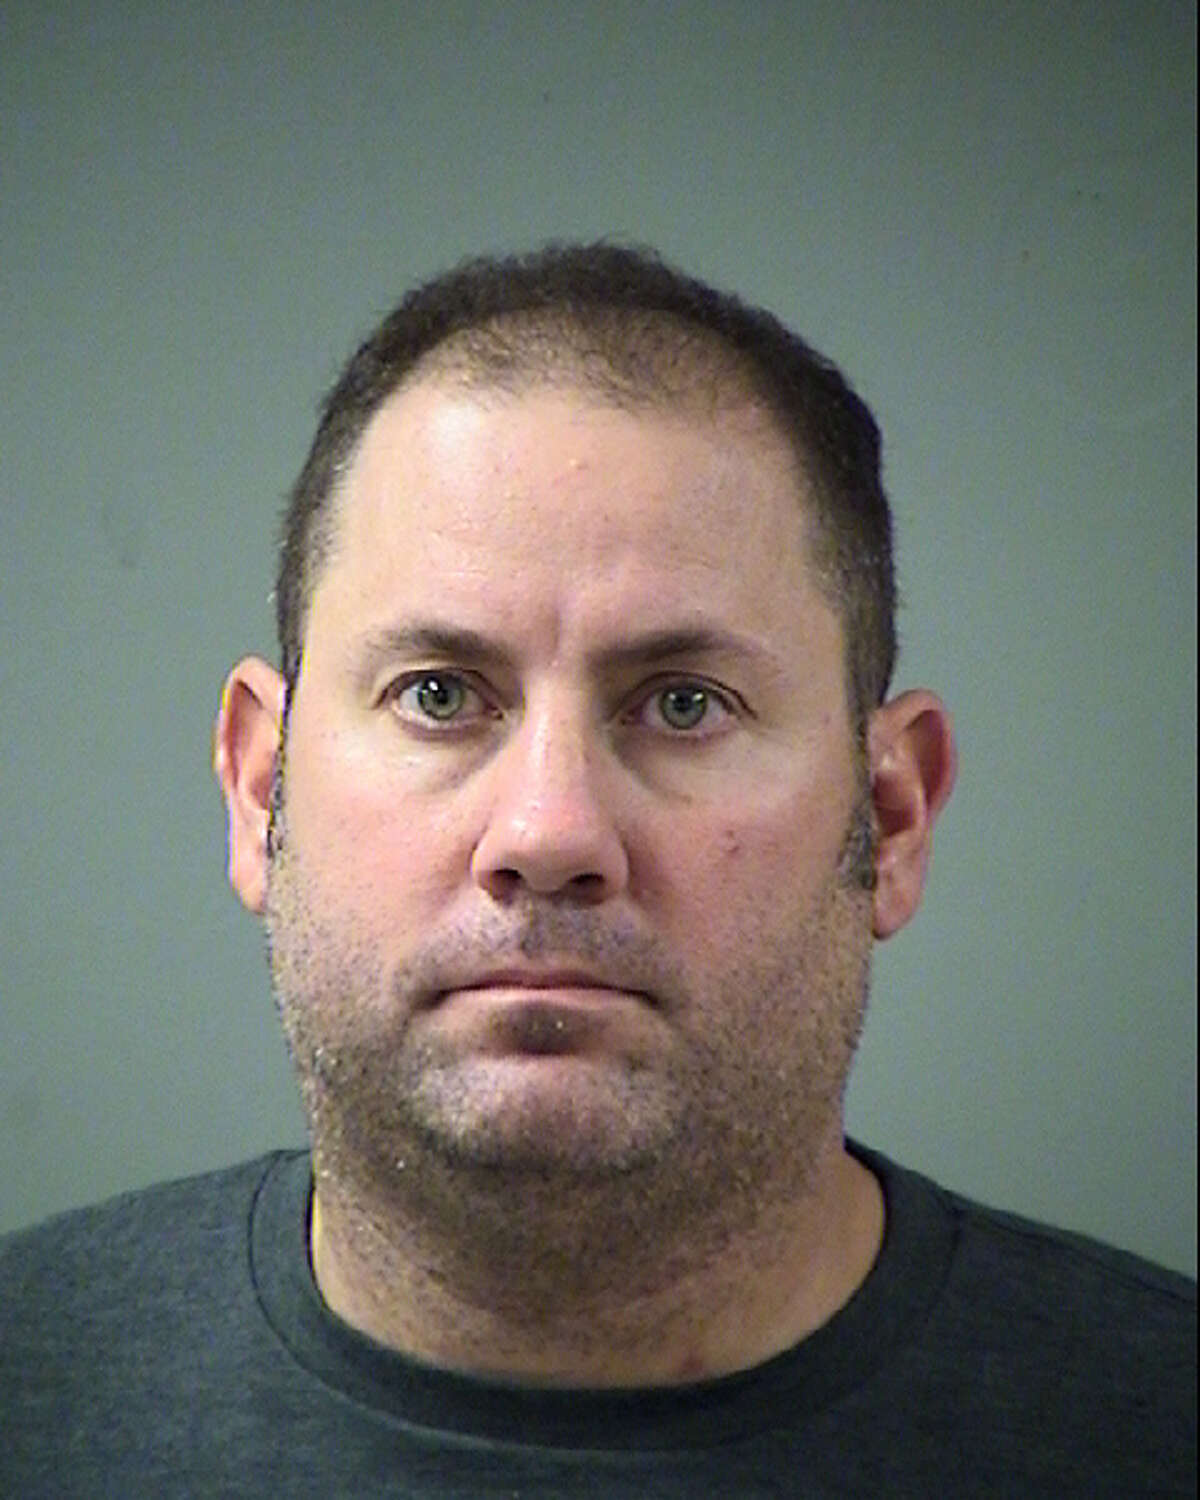 Adam Lee, 40, now faces a charge of public lewdness. She was booked into the Bexar County Jail on a $1,600 bond.